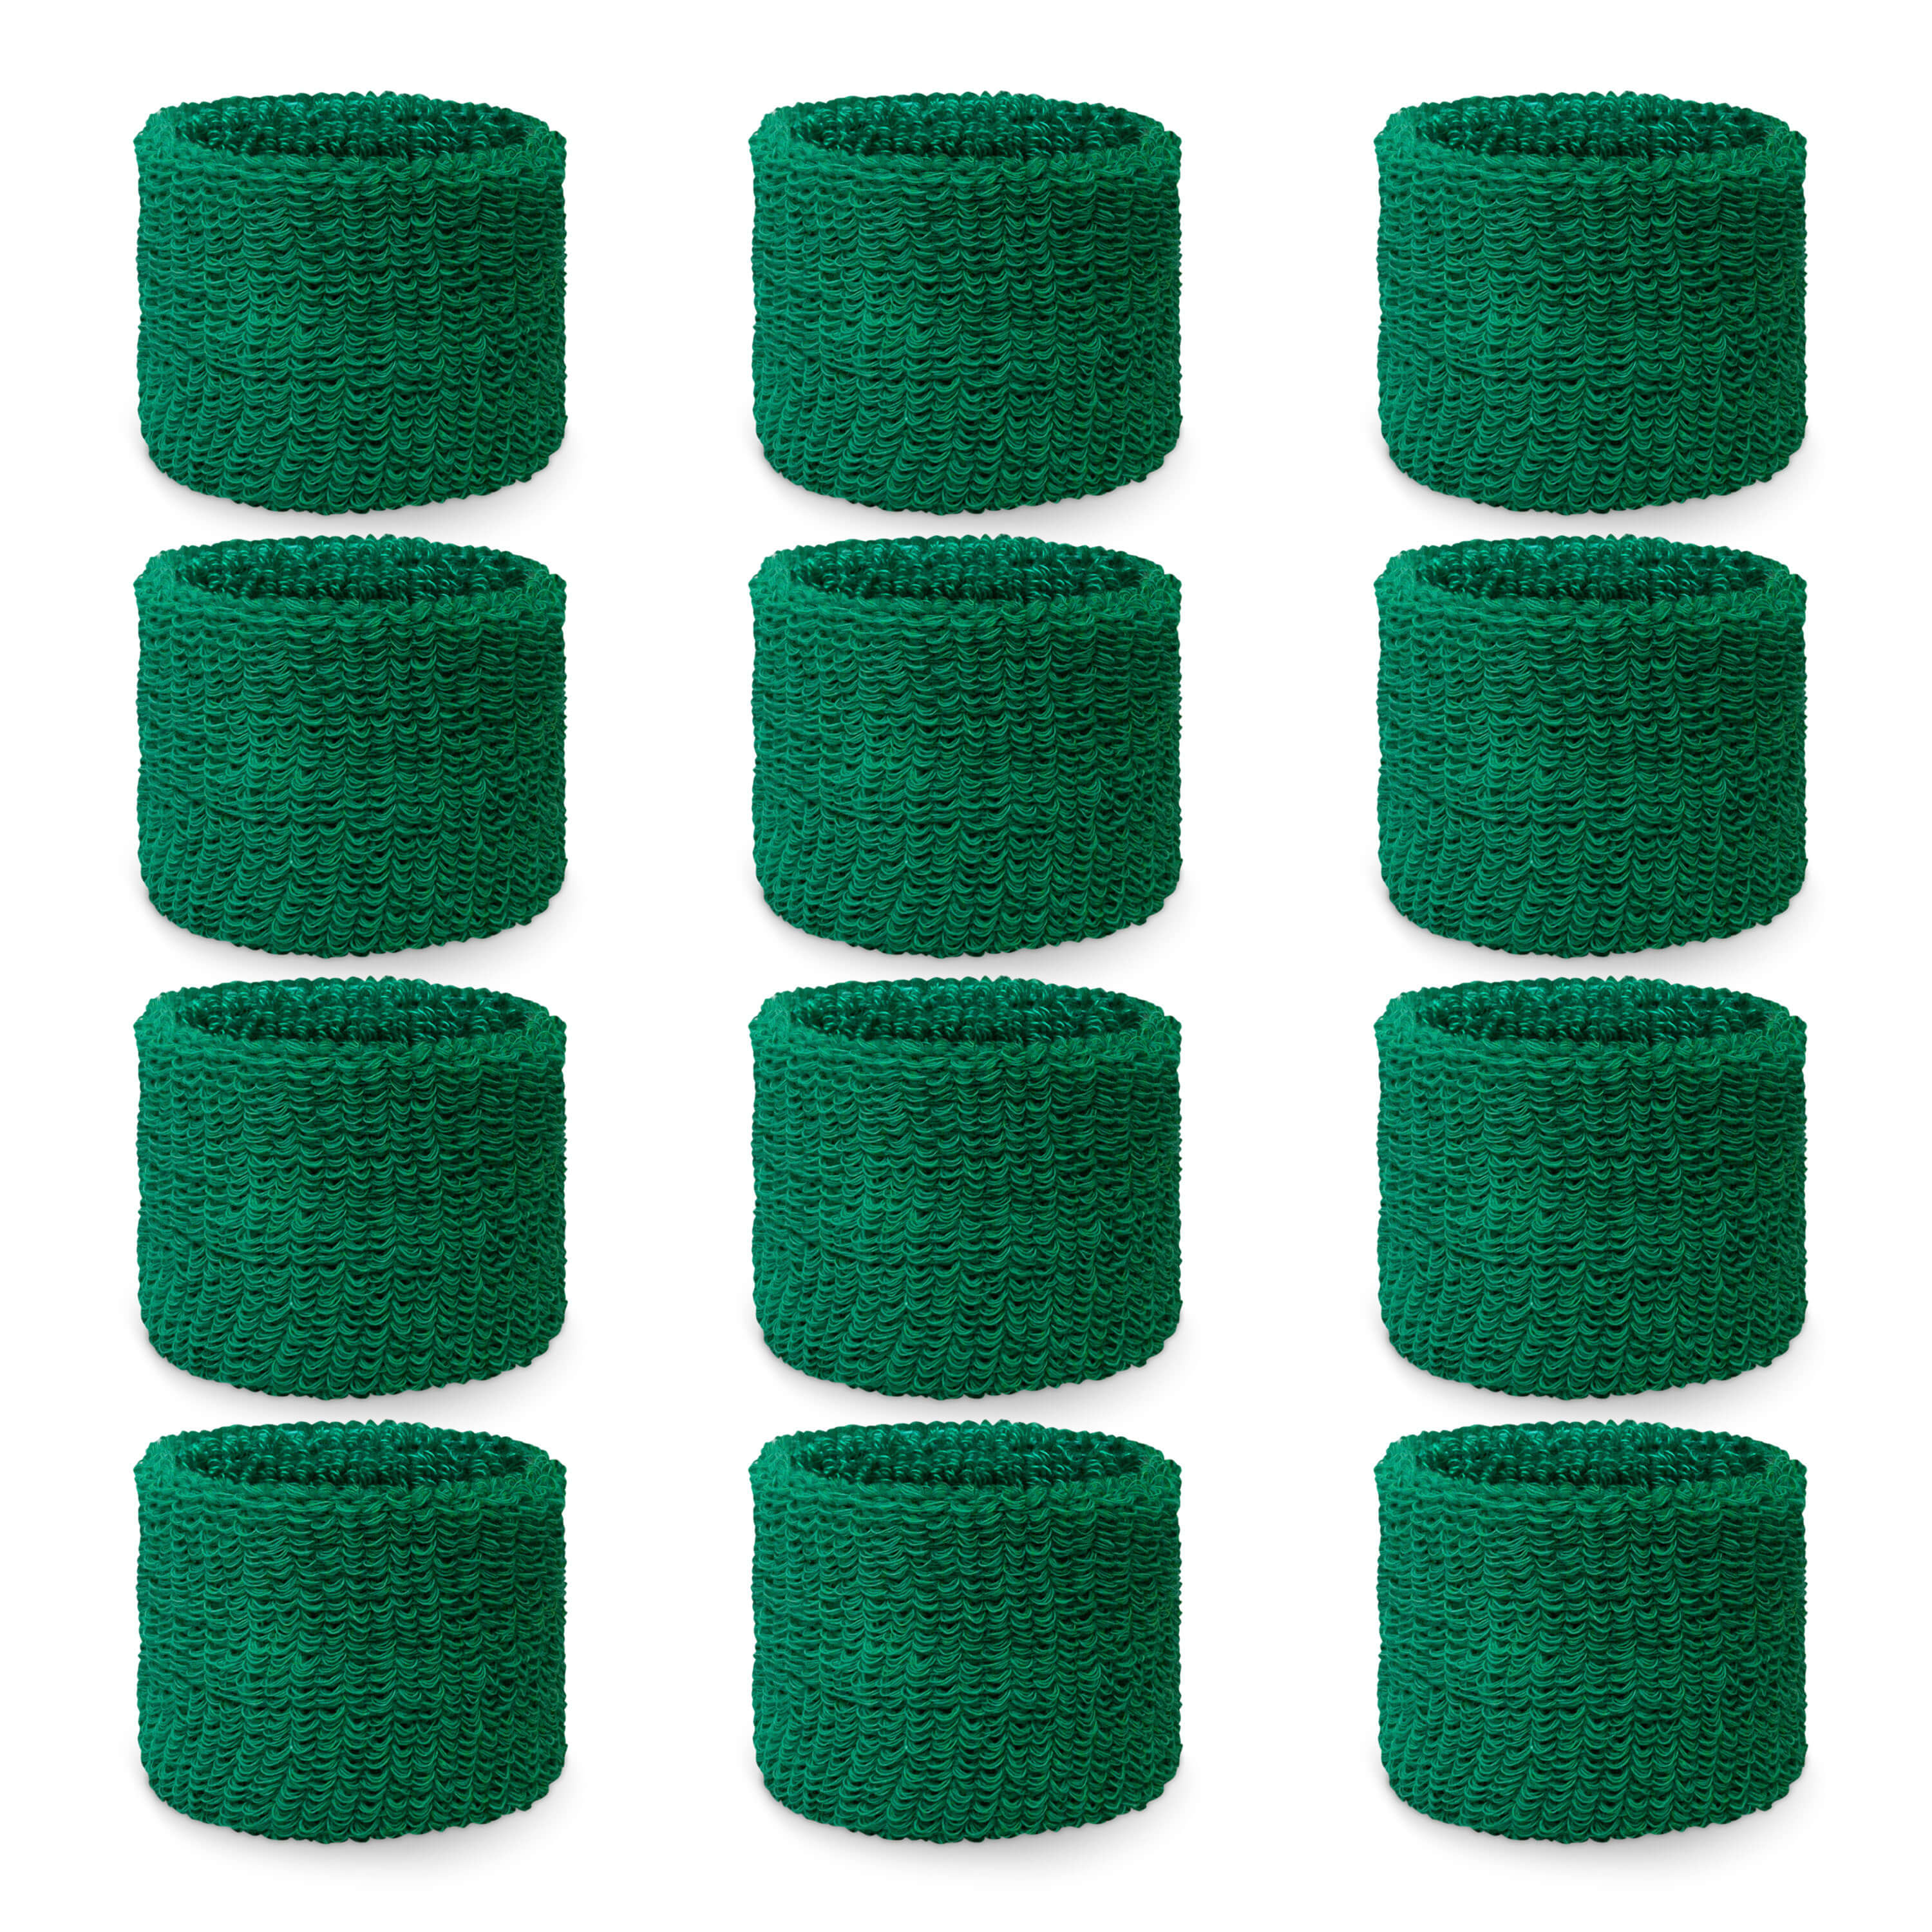 Green Youth Cheap Wristbands Wholesale for Church School 6PAIRS